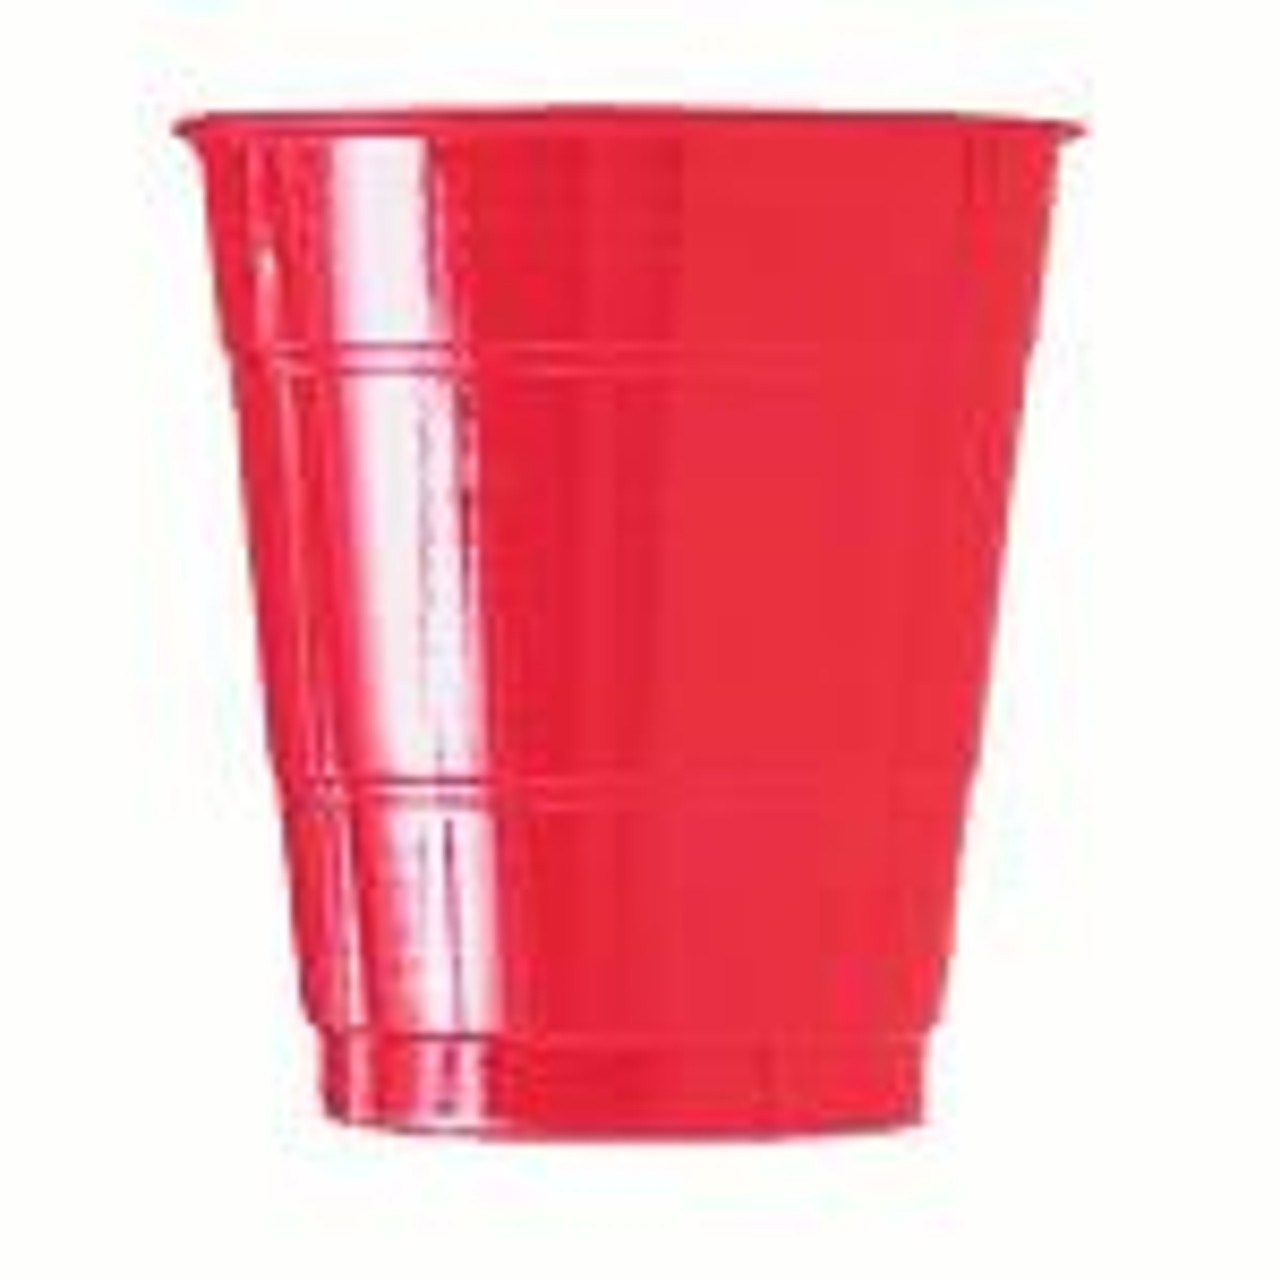 https://cdn11.bigcommerce.com/s-hgqmwywp99/images/stencil/1280x1280/products/51292/46073/red-9oz-plastic-cups-50pk-1__20900.1675880443.jpg?c=1?imbypass=on